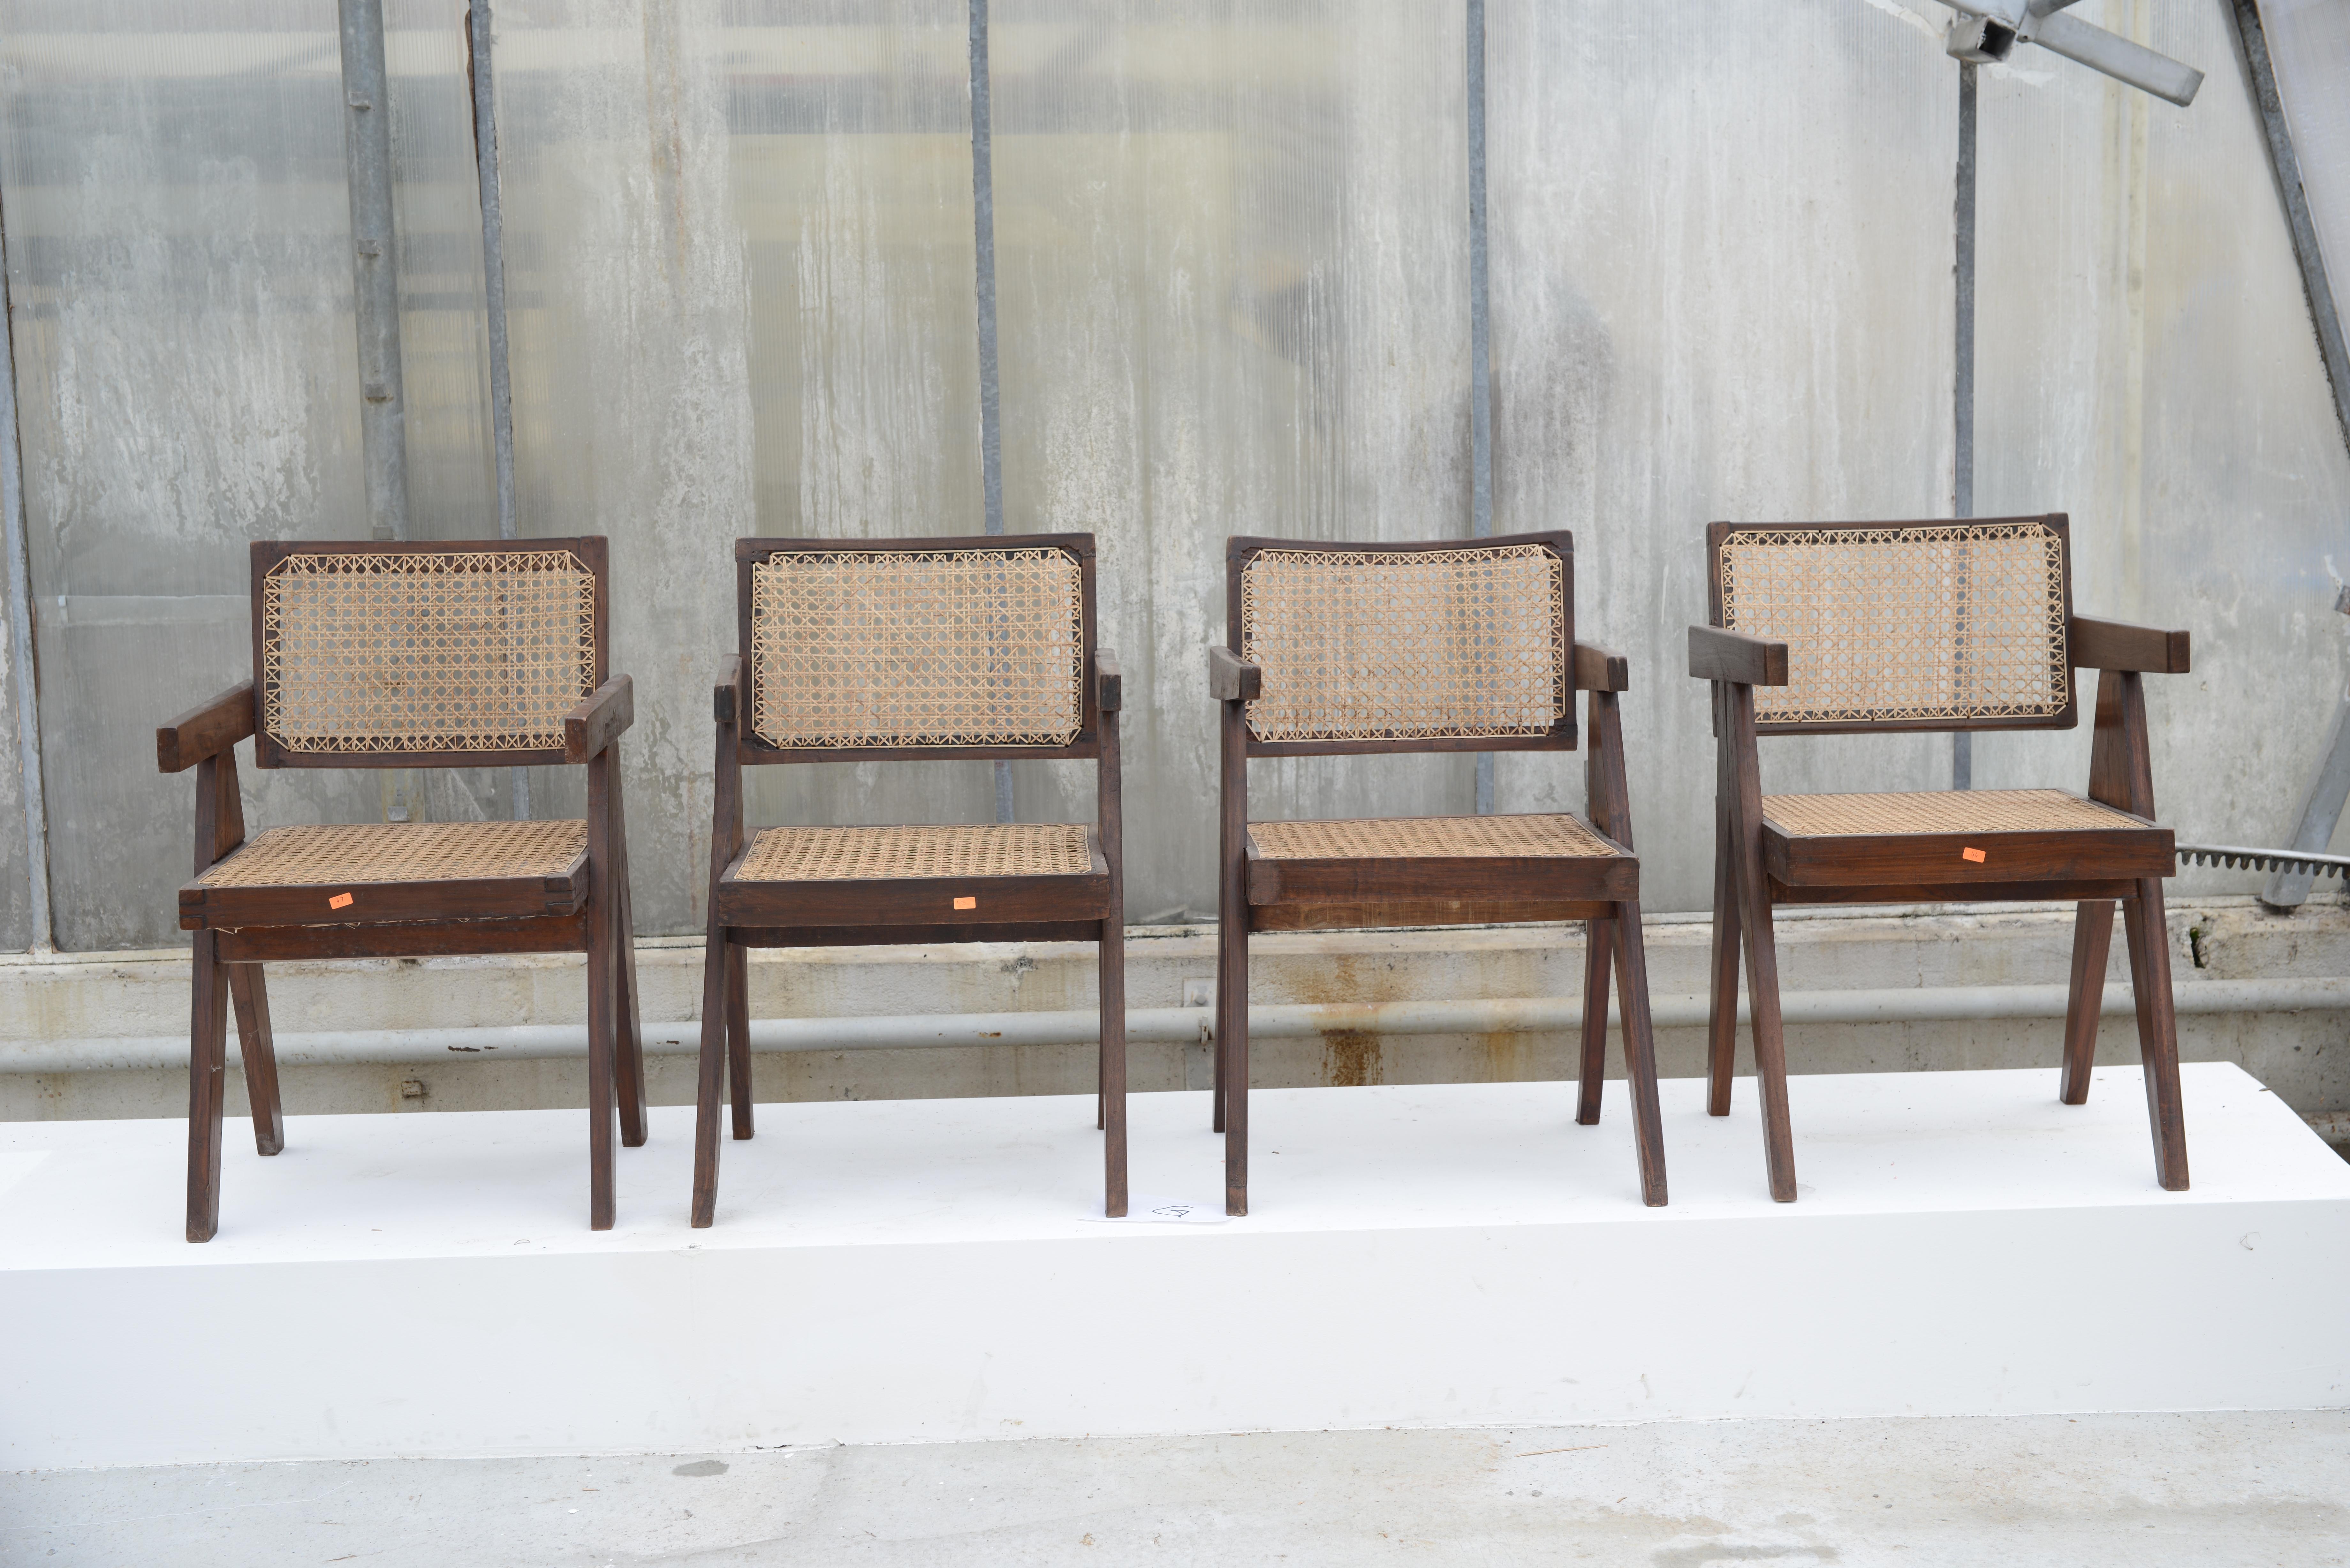 We offer a set of 4 authentic Jeanneret dining chairs. Normally they are always a bit different in size, so they normally never fit. This is a rare set where dimensions are very similar which is a rare opportunity. If you're interested in more